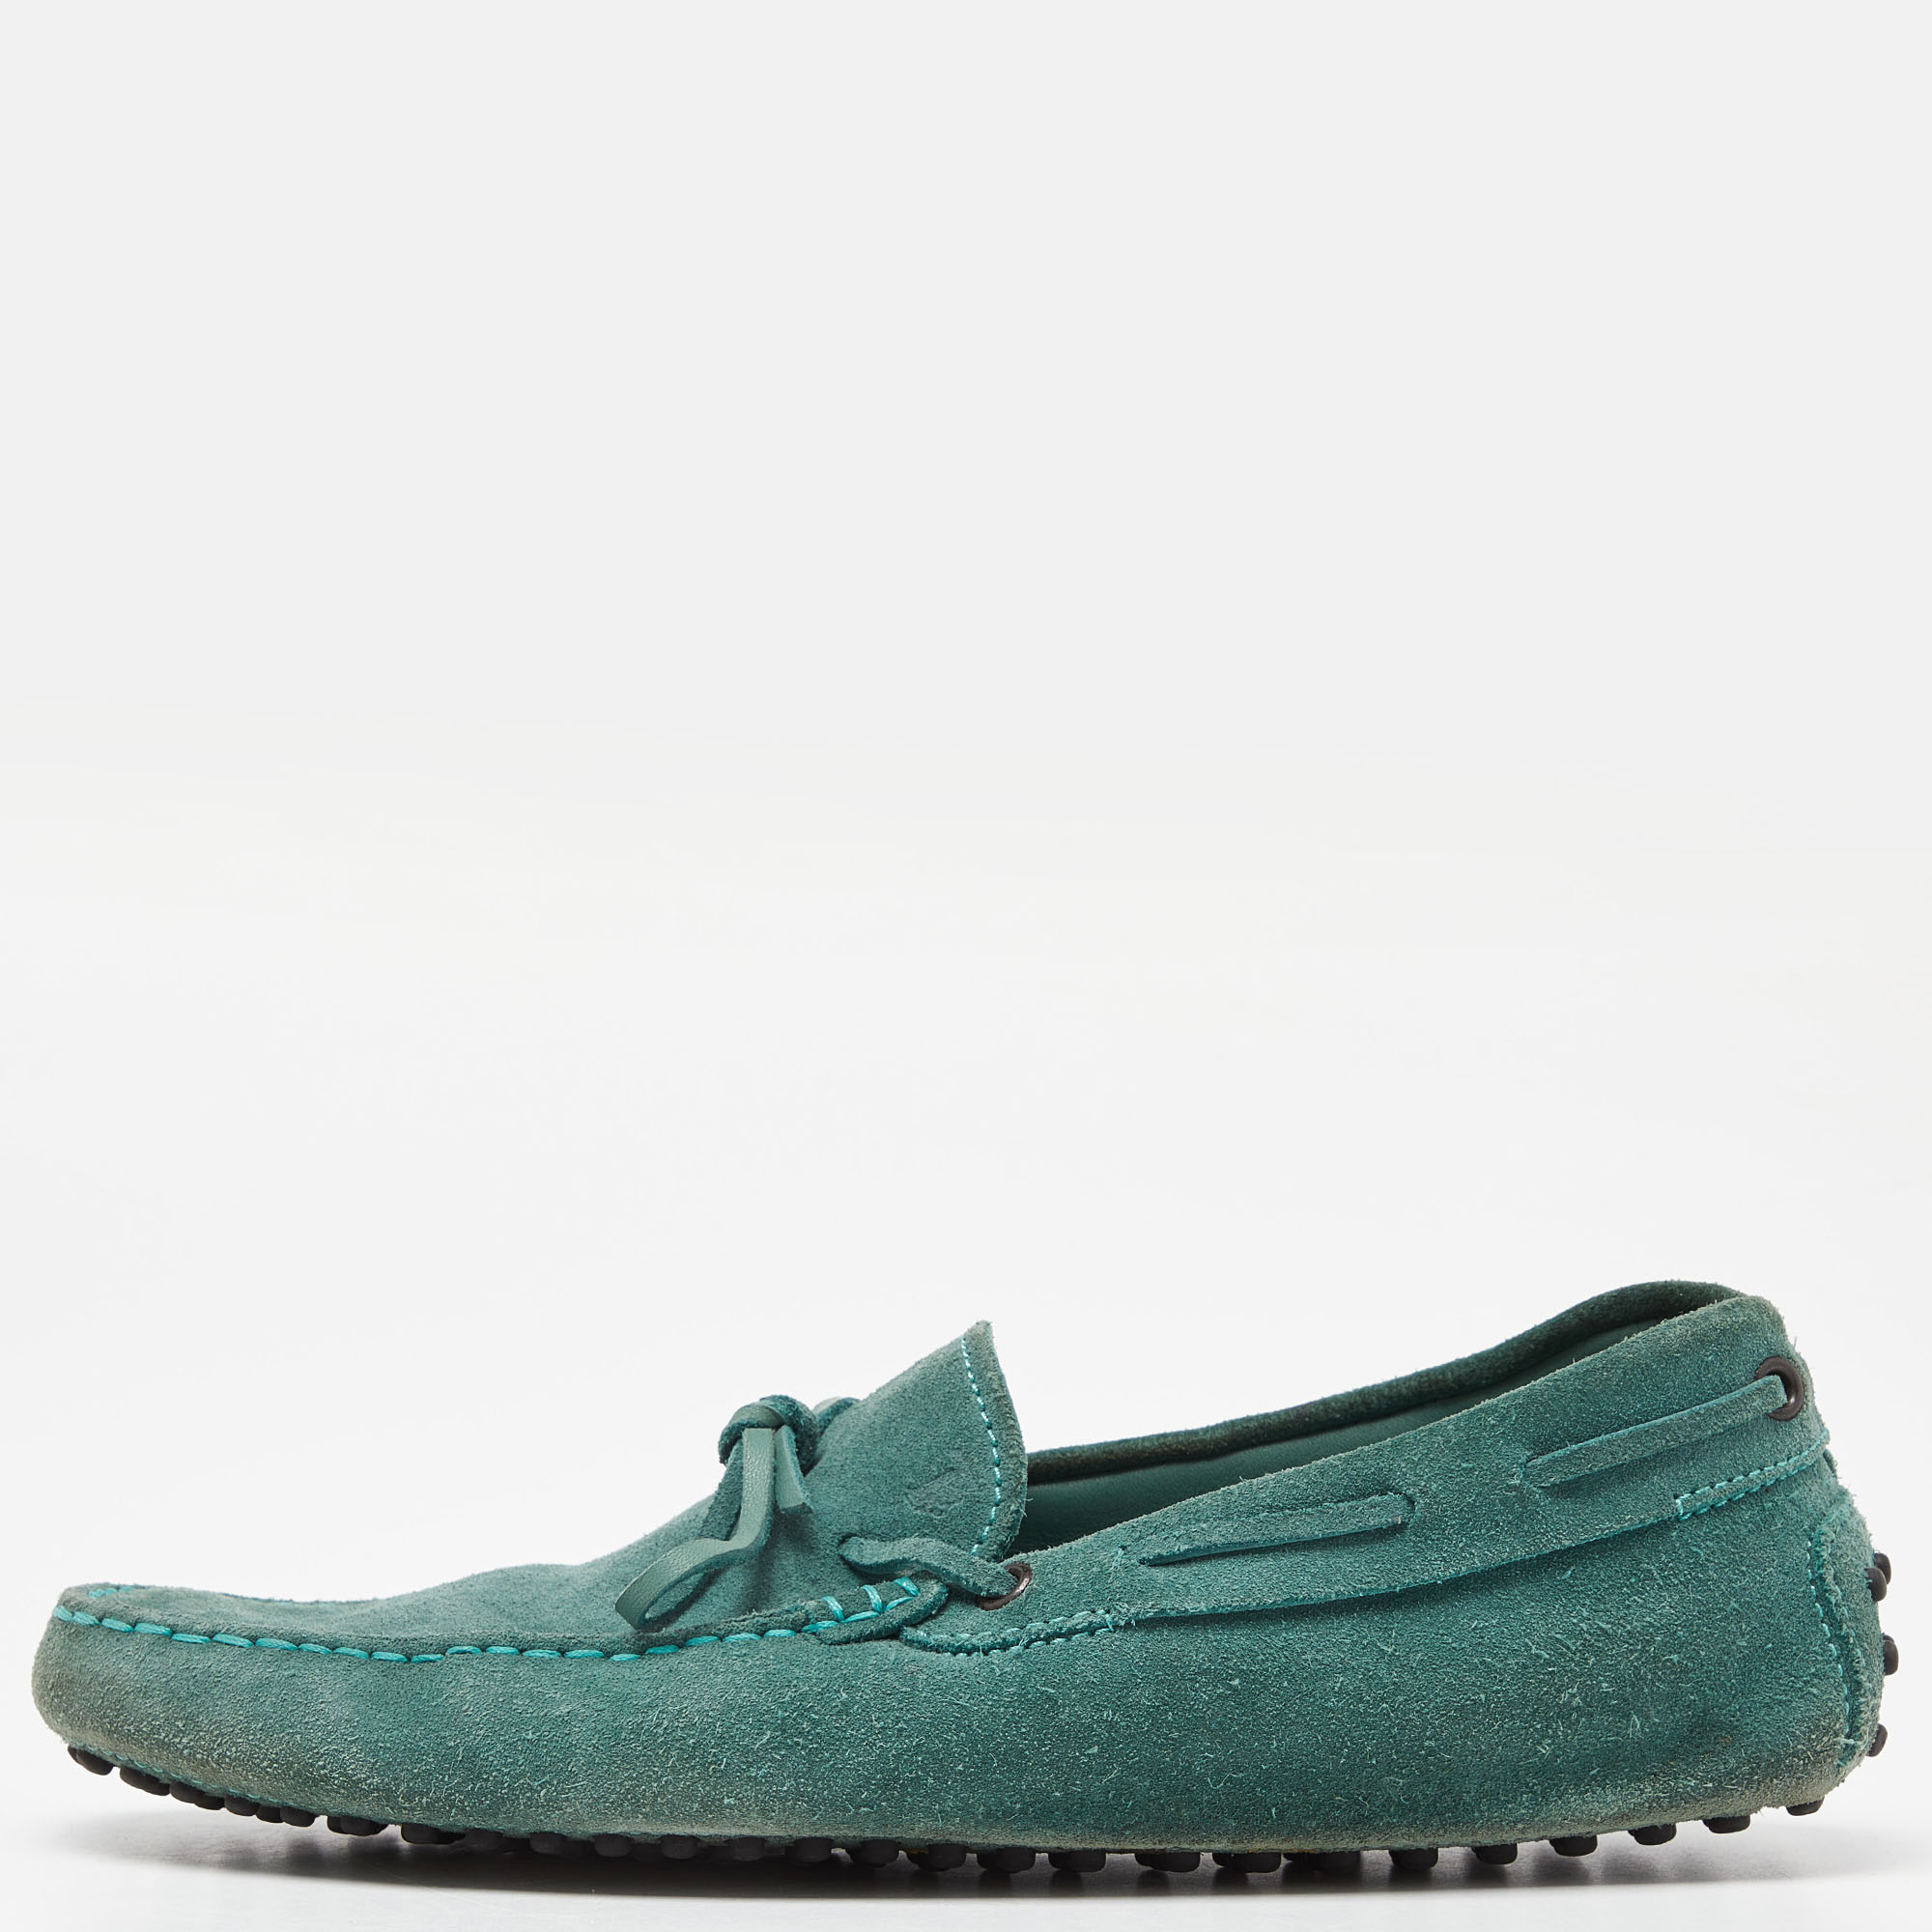 Tod's green suede gommino slip on loafers size 39.5